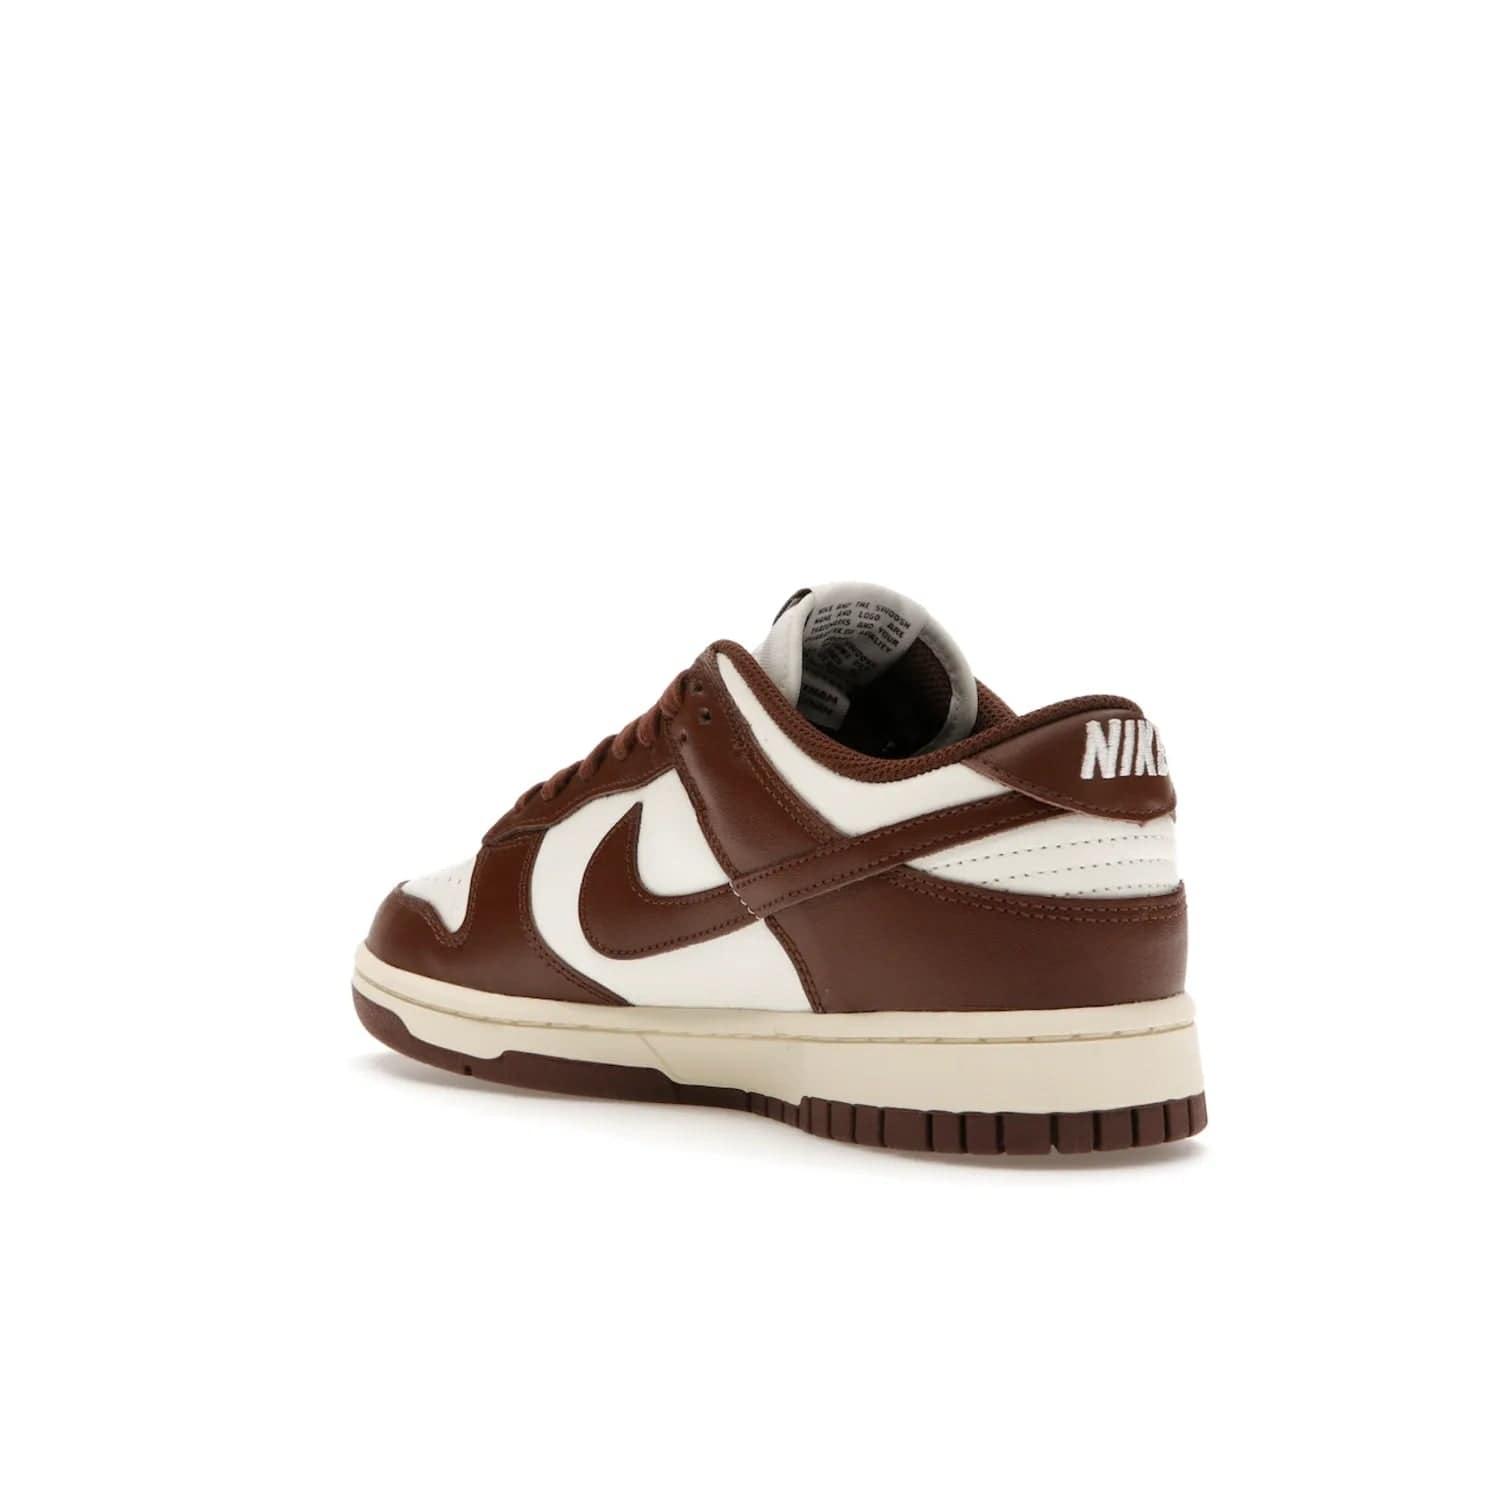 Nike Dunk Low Cacao Wow (Women's) - Image 24 - Only at www.BallersClubKickz.com - Revised
Get the Nike Dunk Low Cacao Wow and make a statement! Plush leather and a cool Cacao Wow finish bring together a unique mix of comfort and fashion that will turn heads. Boosted with a Coconut Milk hue. Shop today.